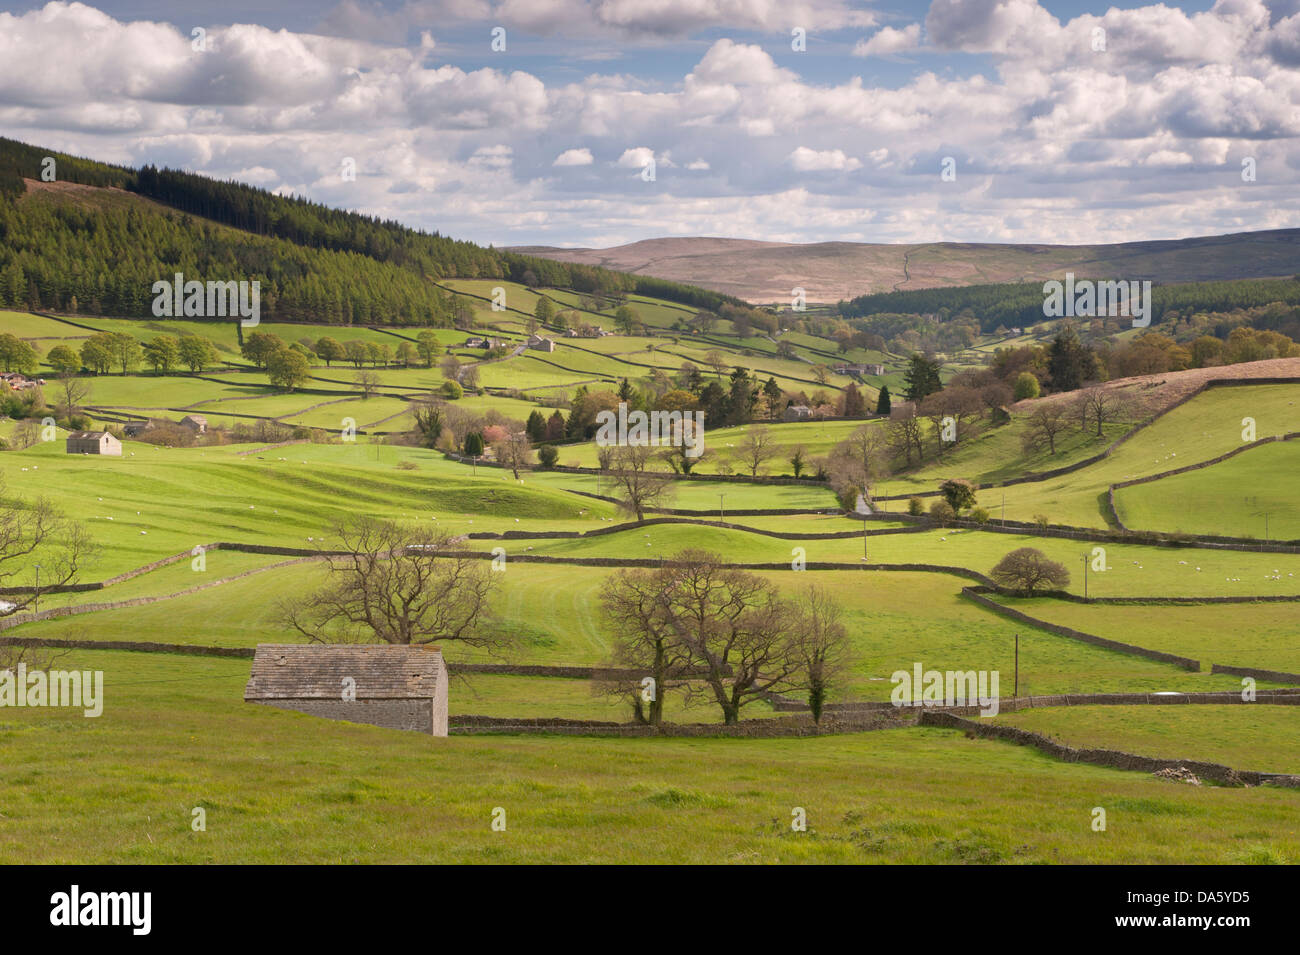 Under dramatic blue sky, long-distance picturesque view to Wharfedale (isolated barns & green pasture in sunlit valley) - Yorkshire Dales, England, UK Stock Photo